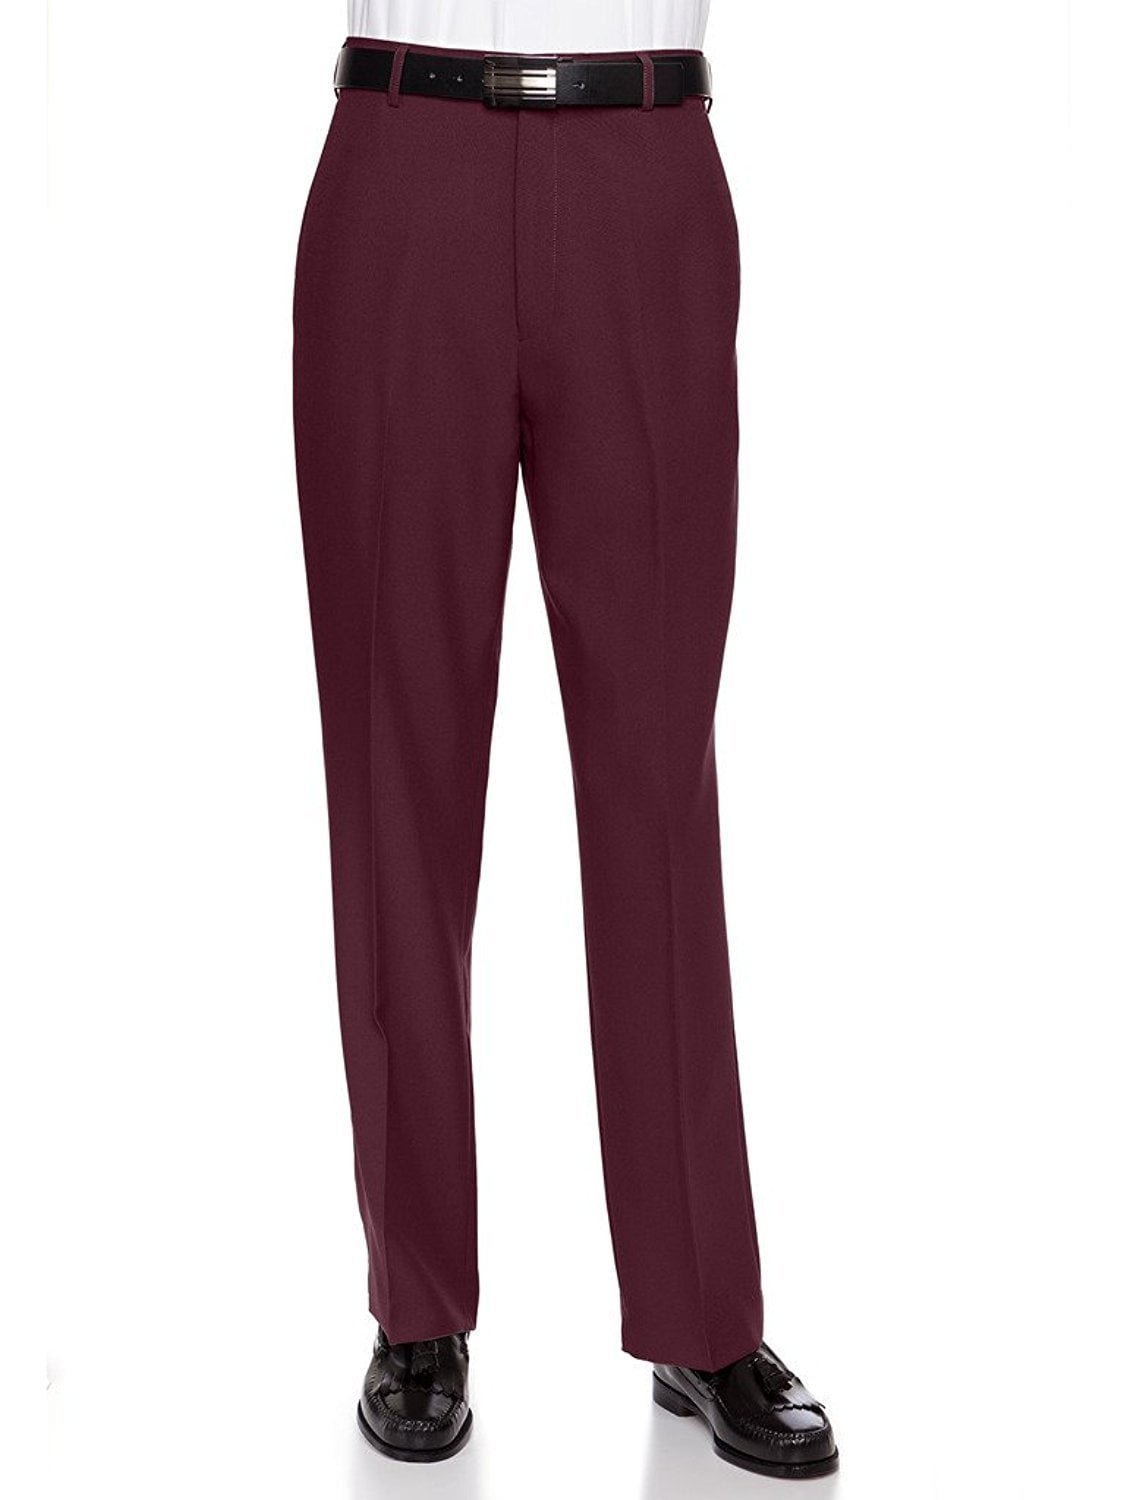 RGM Men's Flat Front Dress Pant Modern Fit Perfect for Every Day!